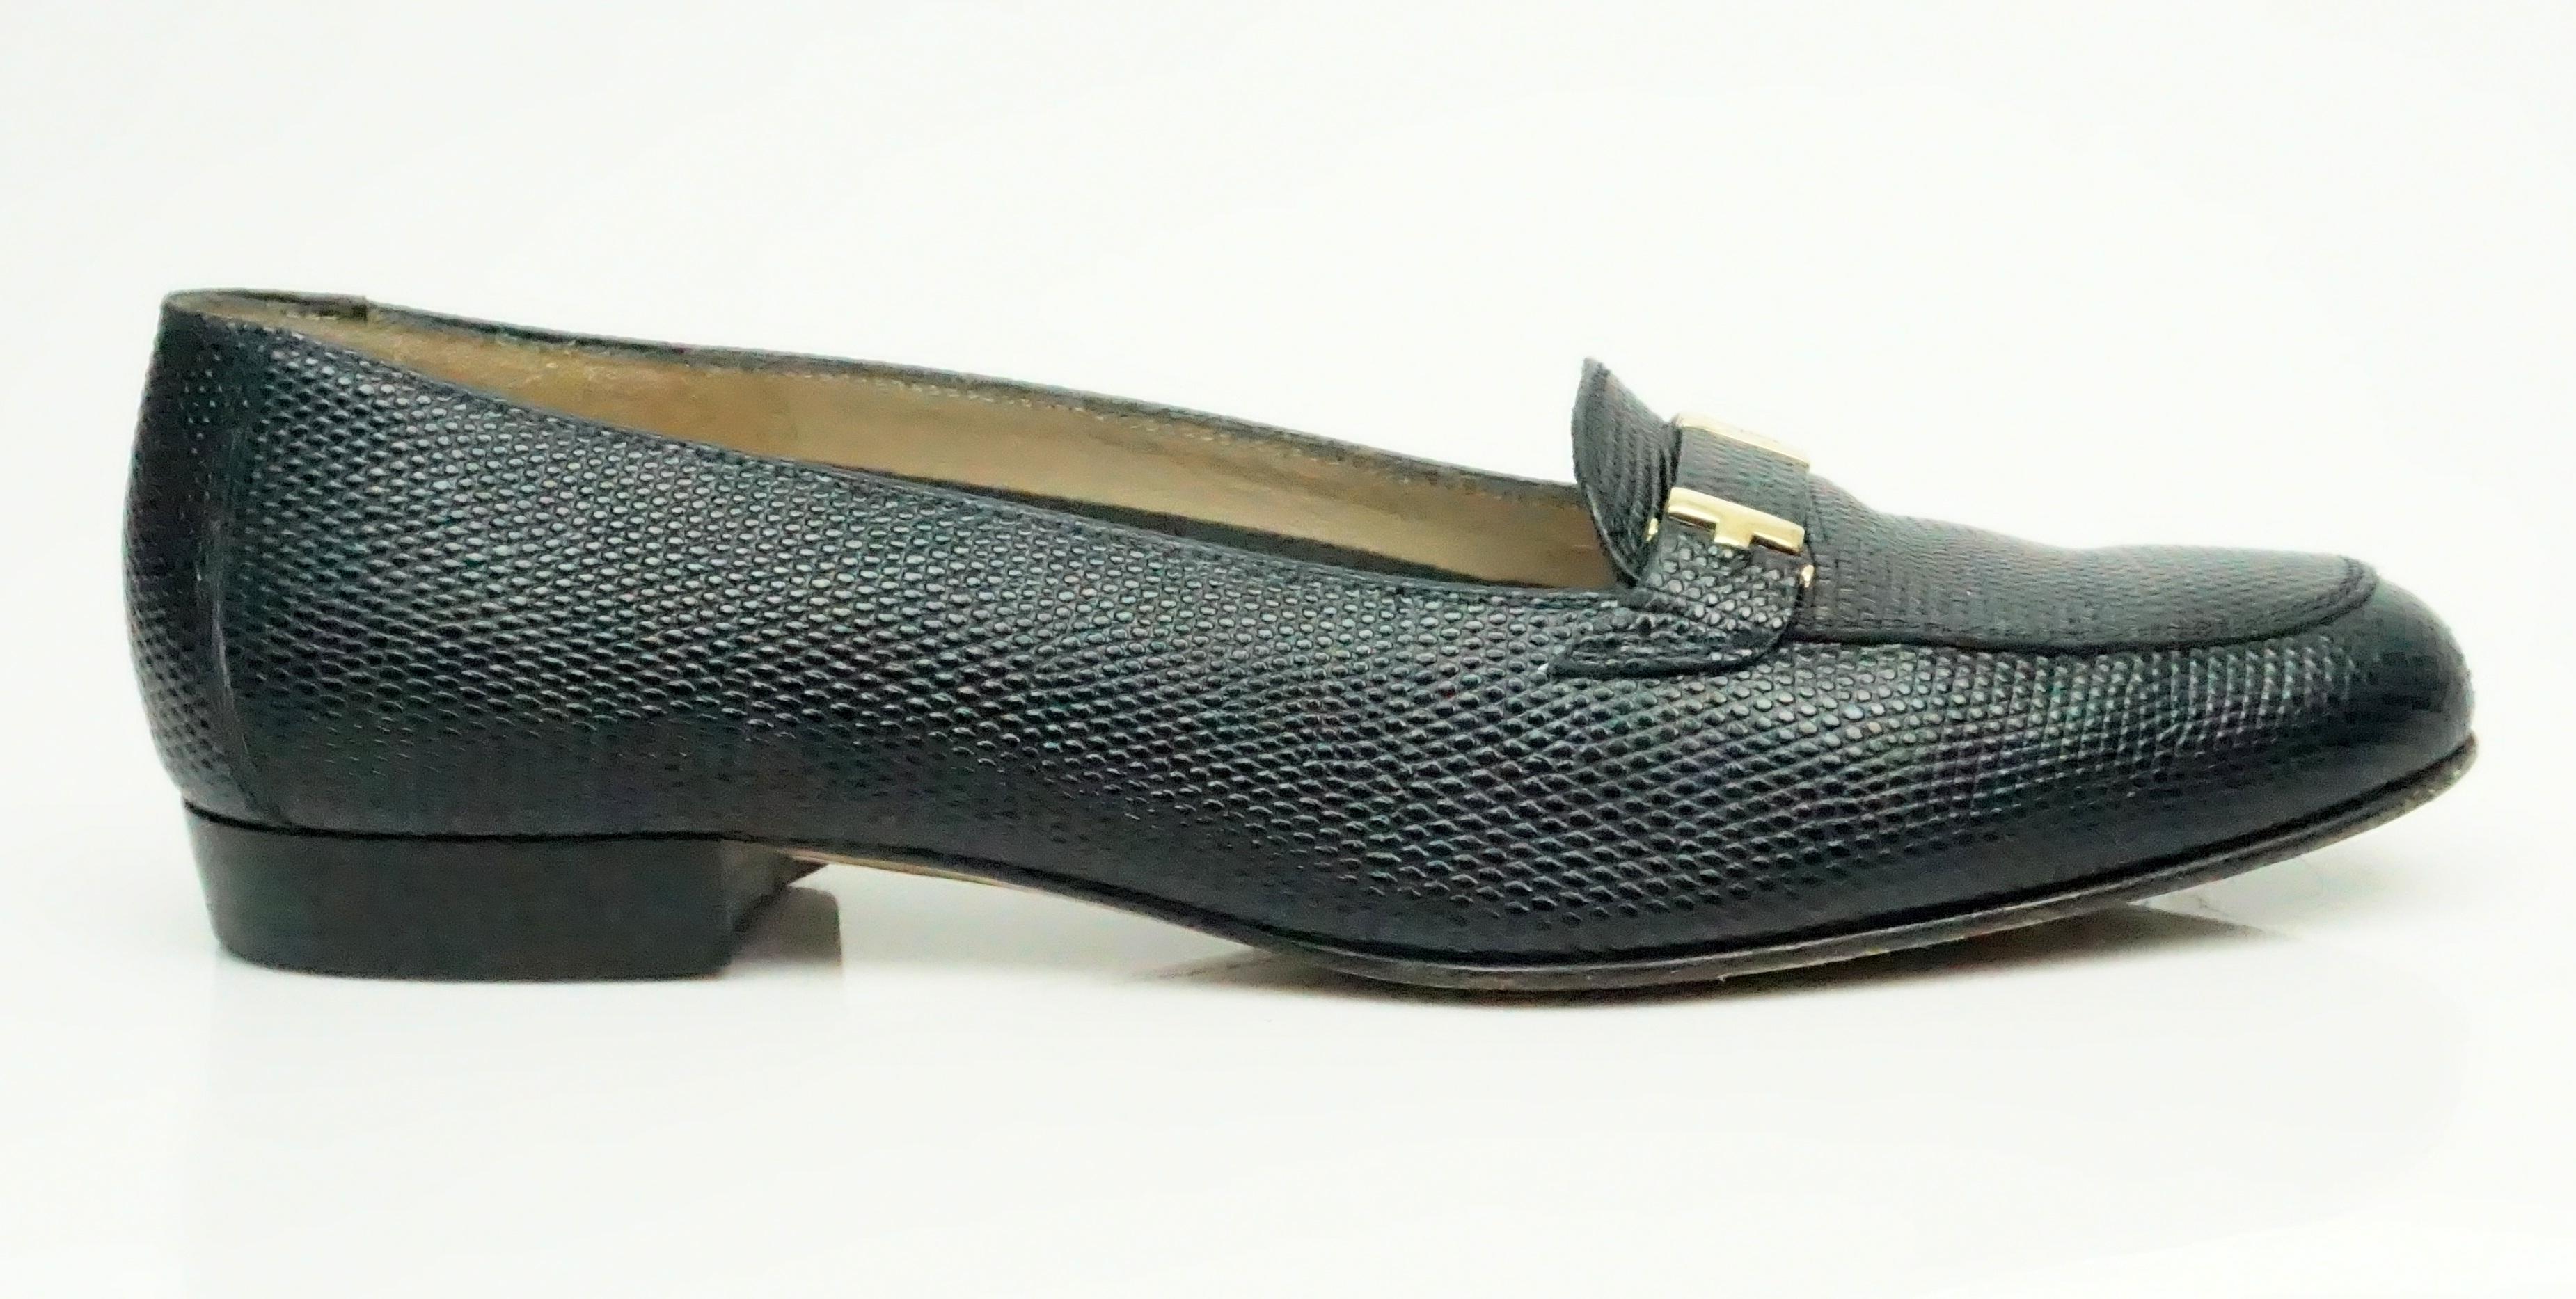 Salvatore Ferragamo Navy Lizard Loafer - 6.5  This beautiful loafers are in good condition. The bottom of the loafer is a bit marked up but the rest of the shoe is in very good condition. There is a simple gold hardware detail on the front of the